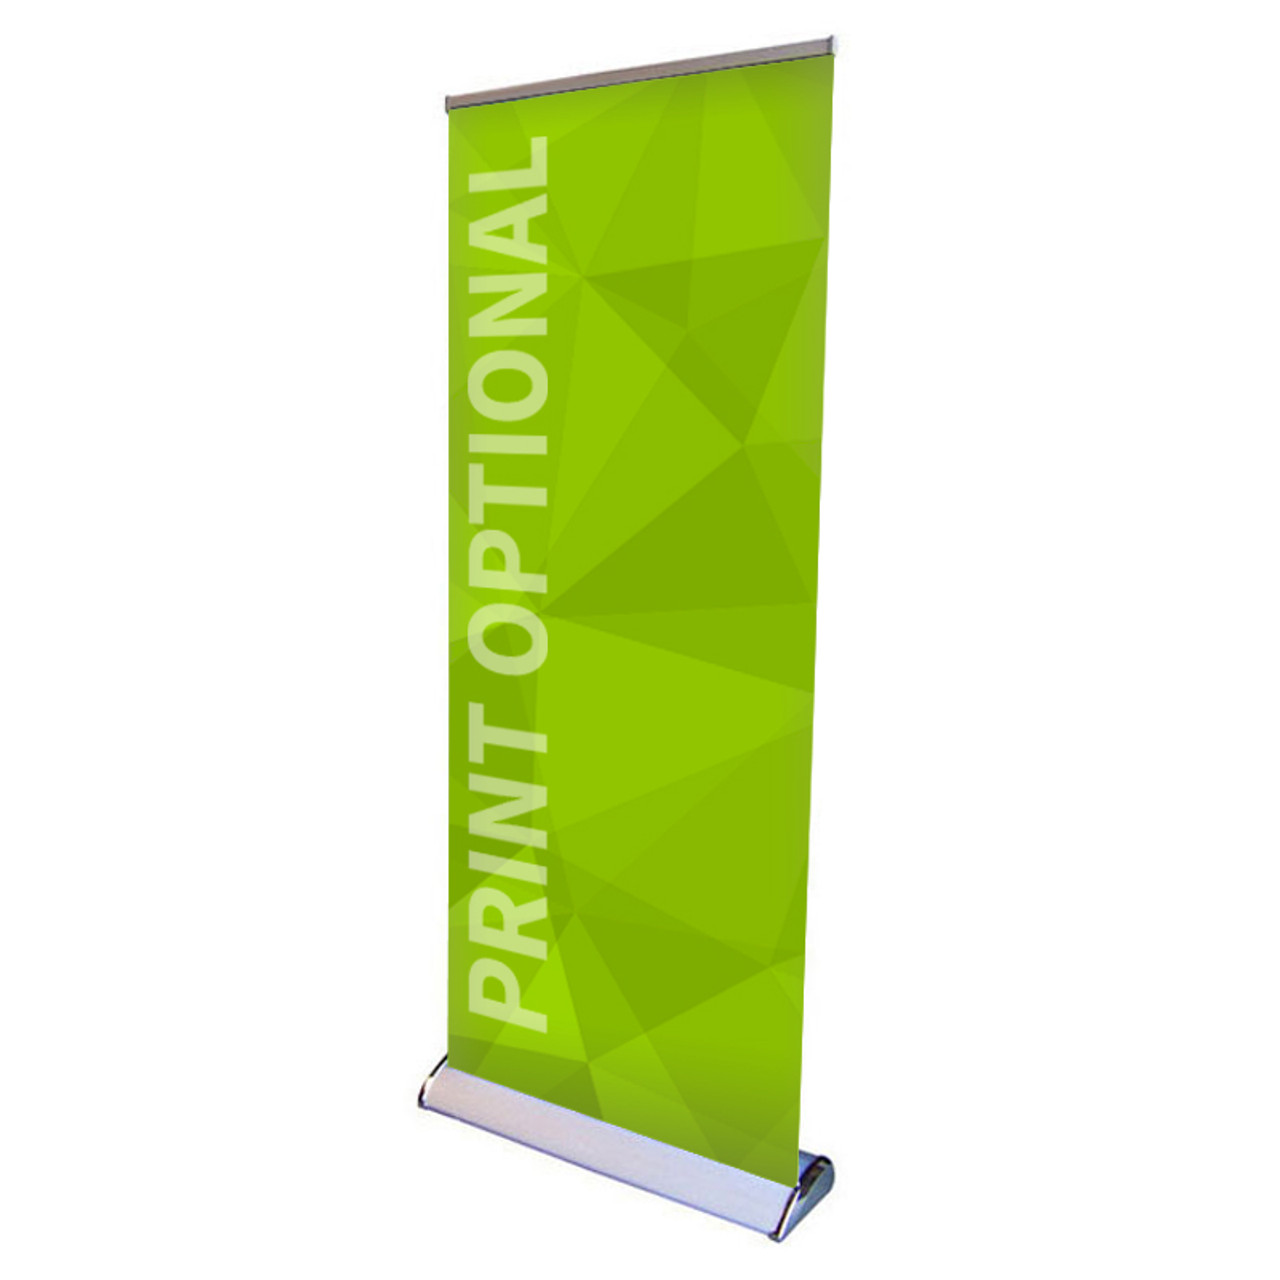 SUPREME SPACE RETRACTABLE BANNER STAND